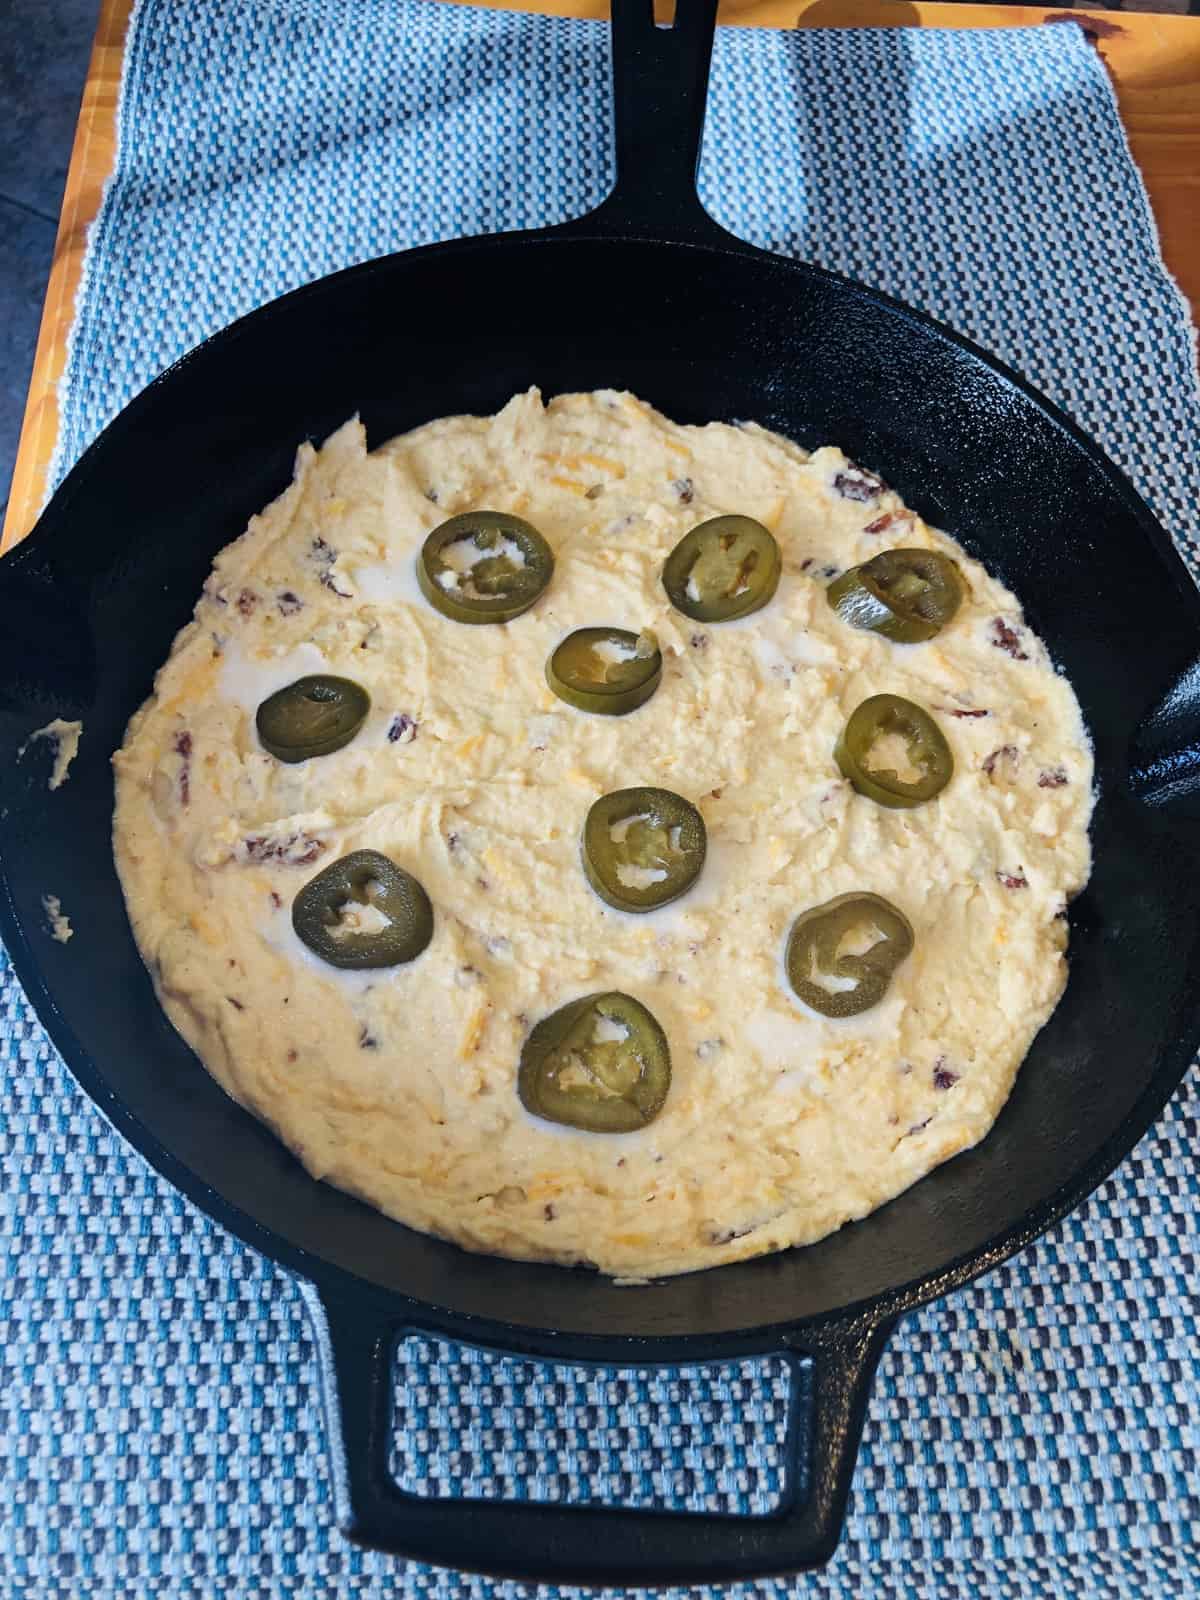 Keto Cornbread batter in the cast iron skillet on a blue placemat